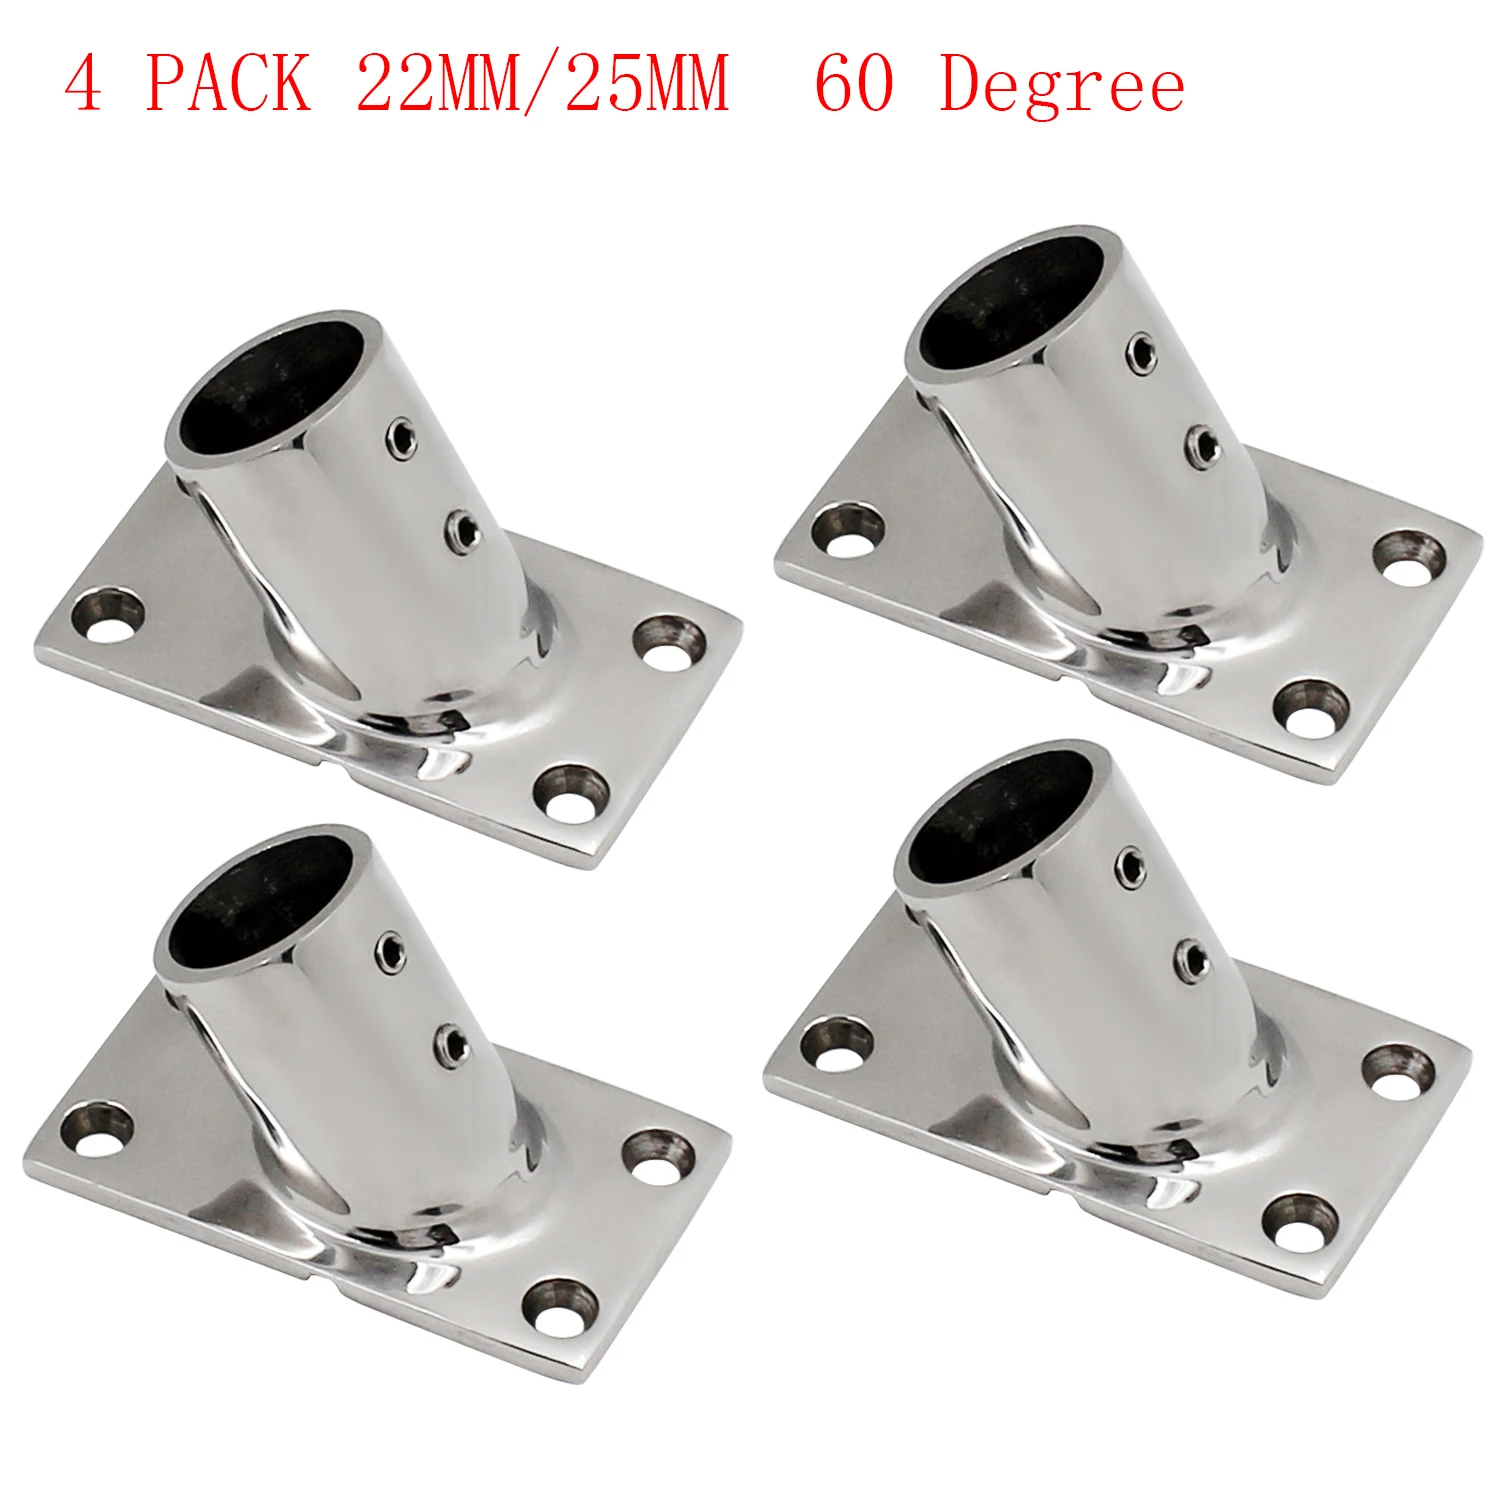 4 PCS 60 Degree Stainless Steel Boat Deck Hand Rail Fitting Stanchion Base for 7/8'' or 1'' Tube Boat Deck Handrail Fitting Hard